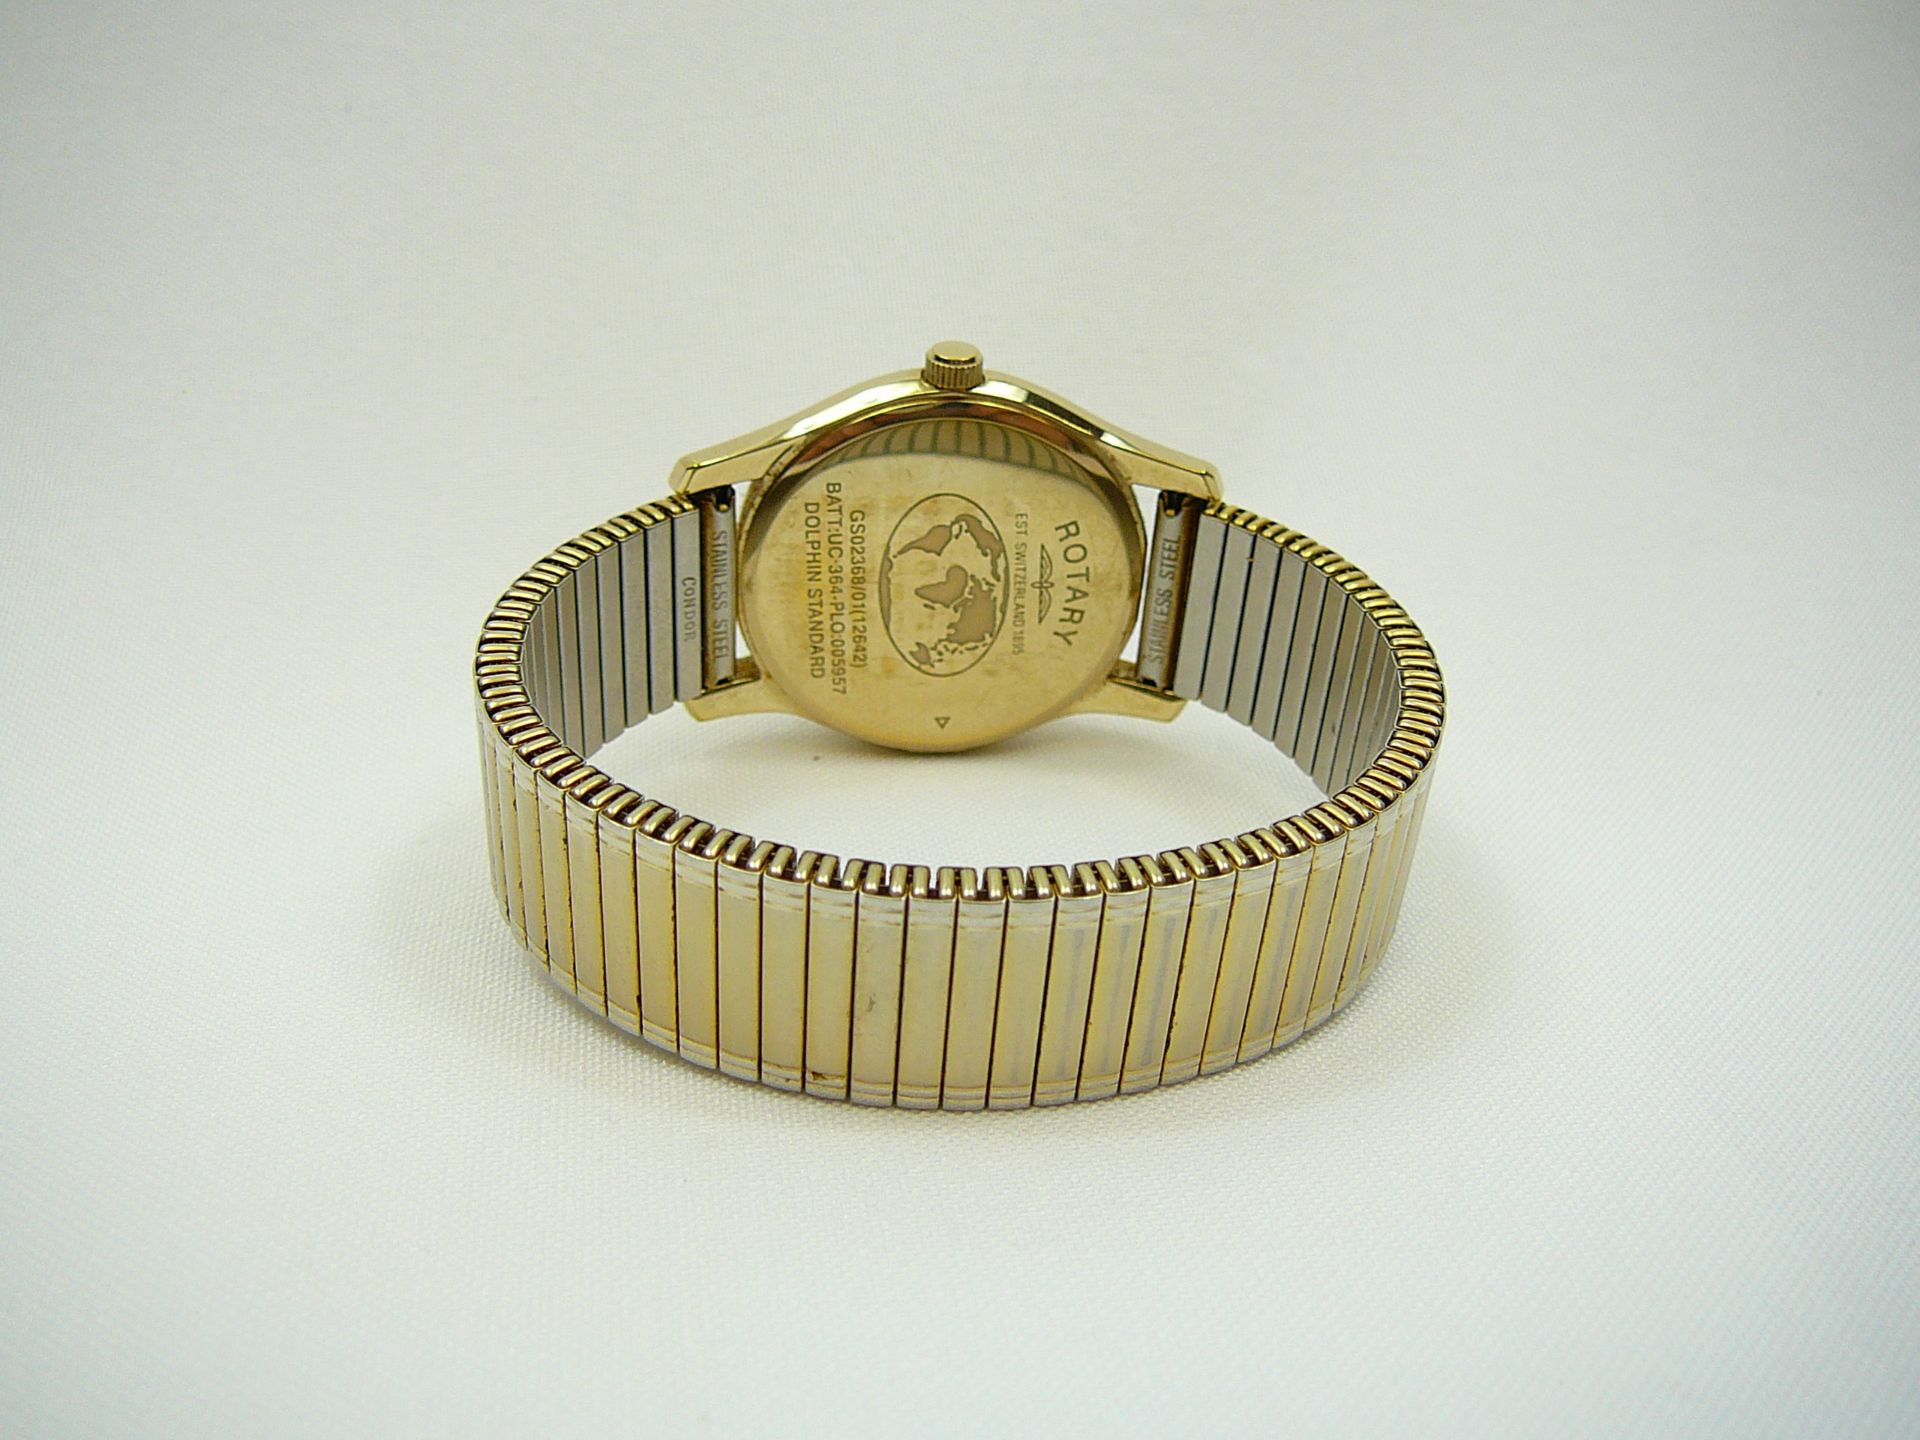 Gents Rotary Wristwatch - Image 3 of 3